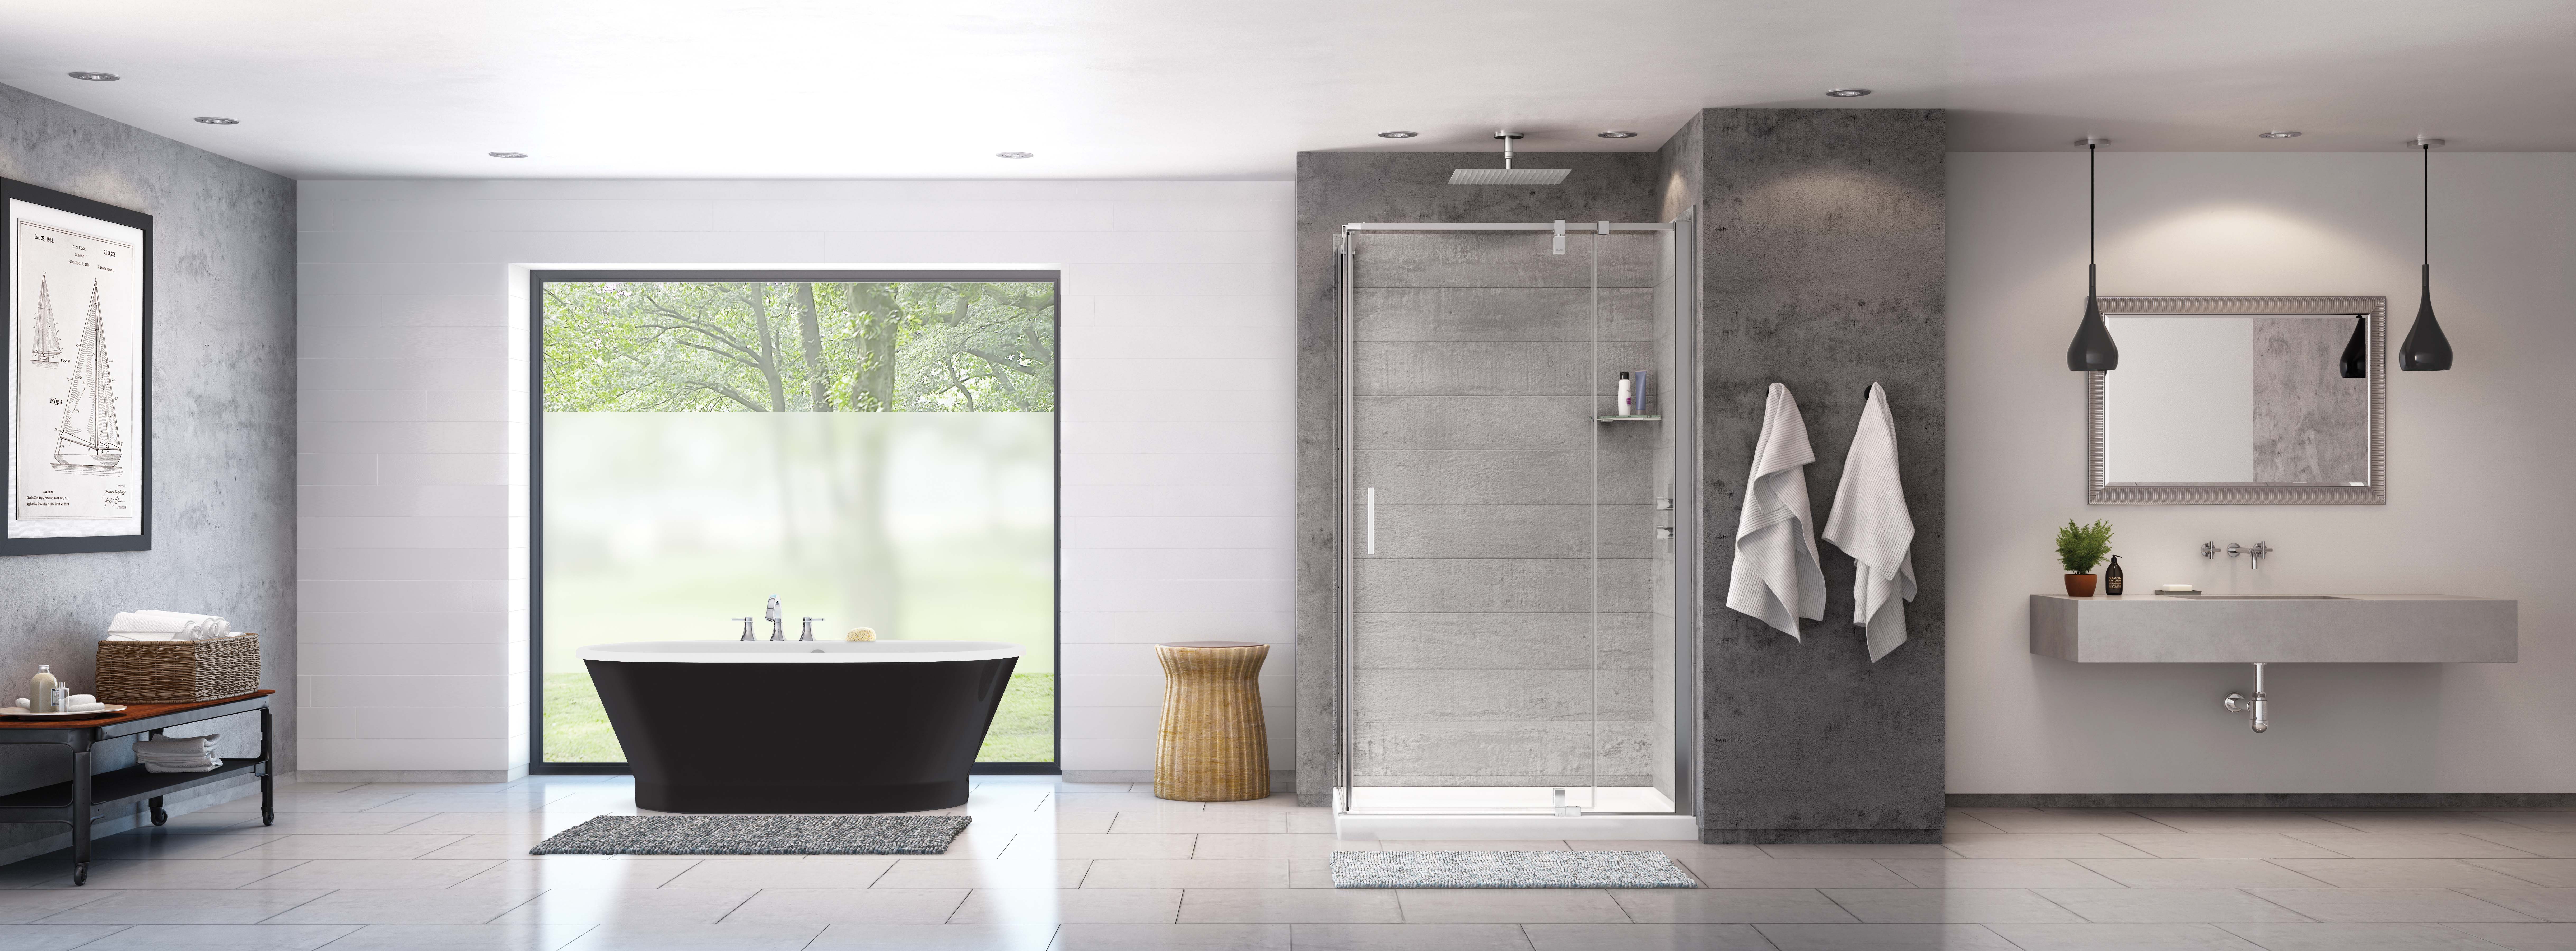 MAAX's Professional bathware features luxury that is affordable and easy to install